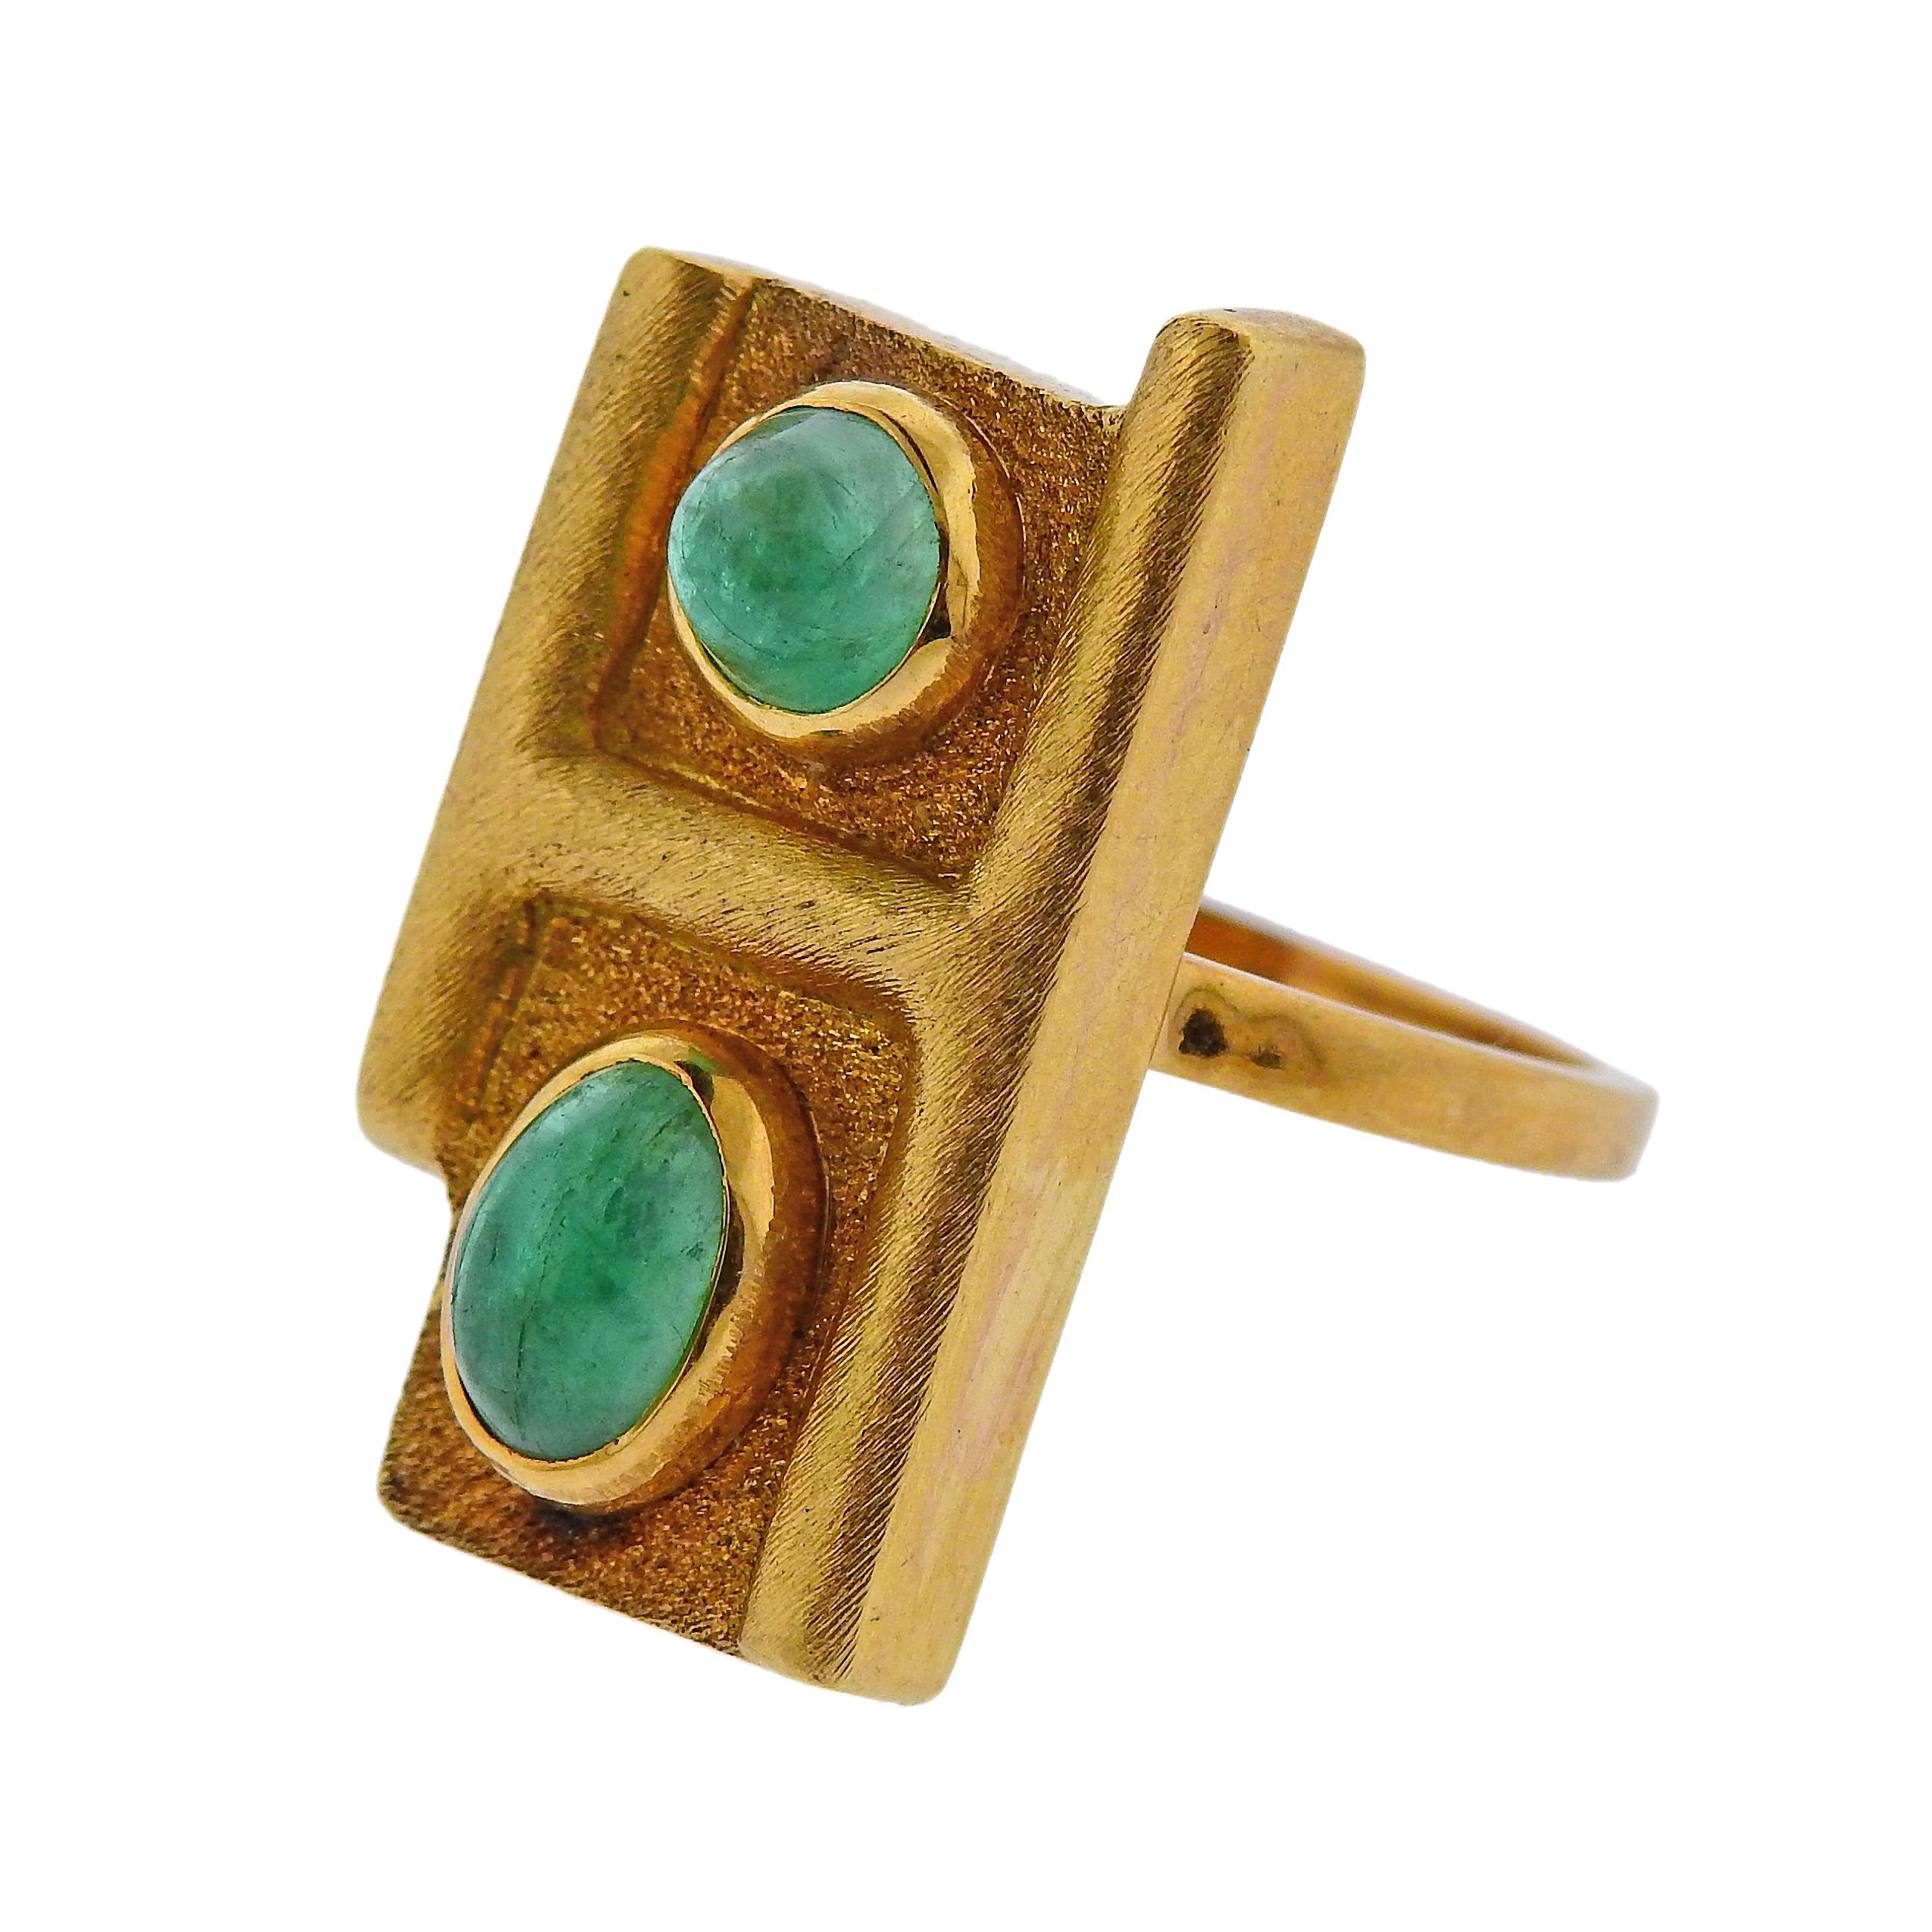 18k yellow gold abstract ring by Burle Marx, adorned with emerald cabochons. Ring size - 6.75, ring top - 24mm x 12mm and weighs 6.3 grams. Marked Burle Marx 750.